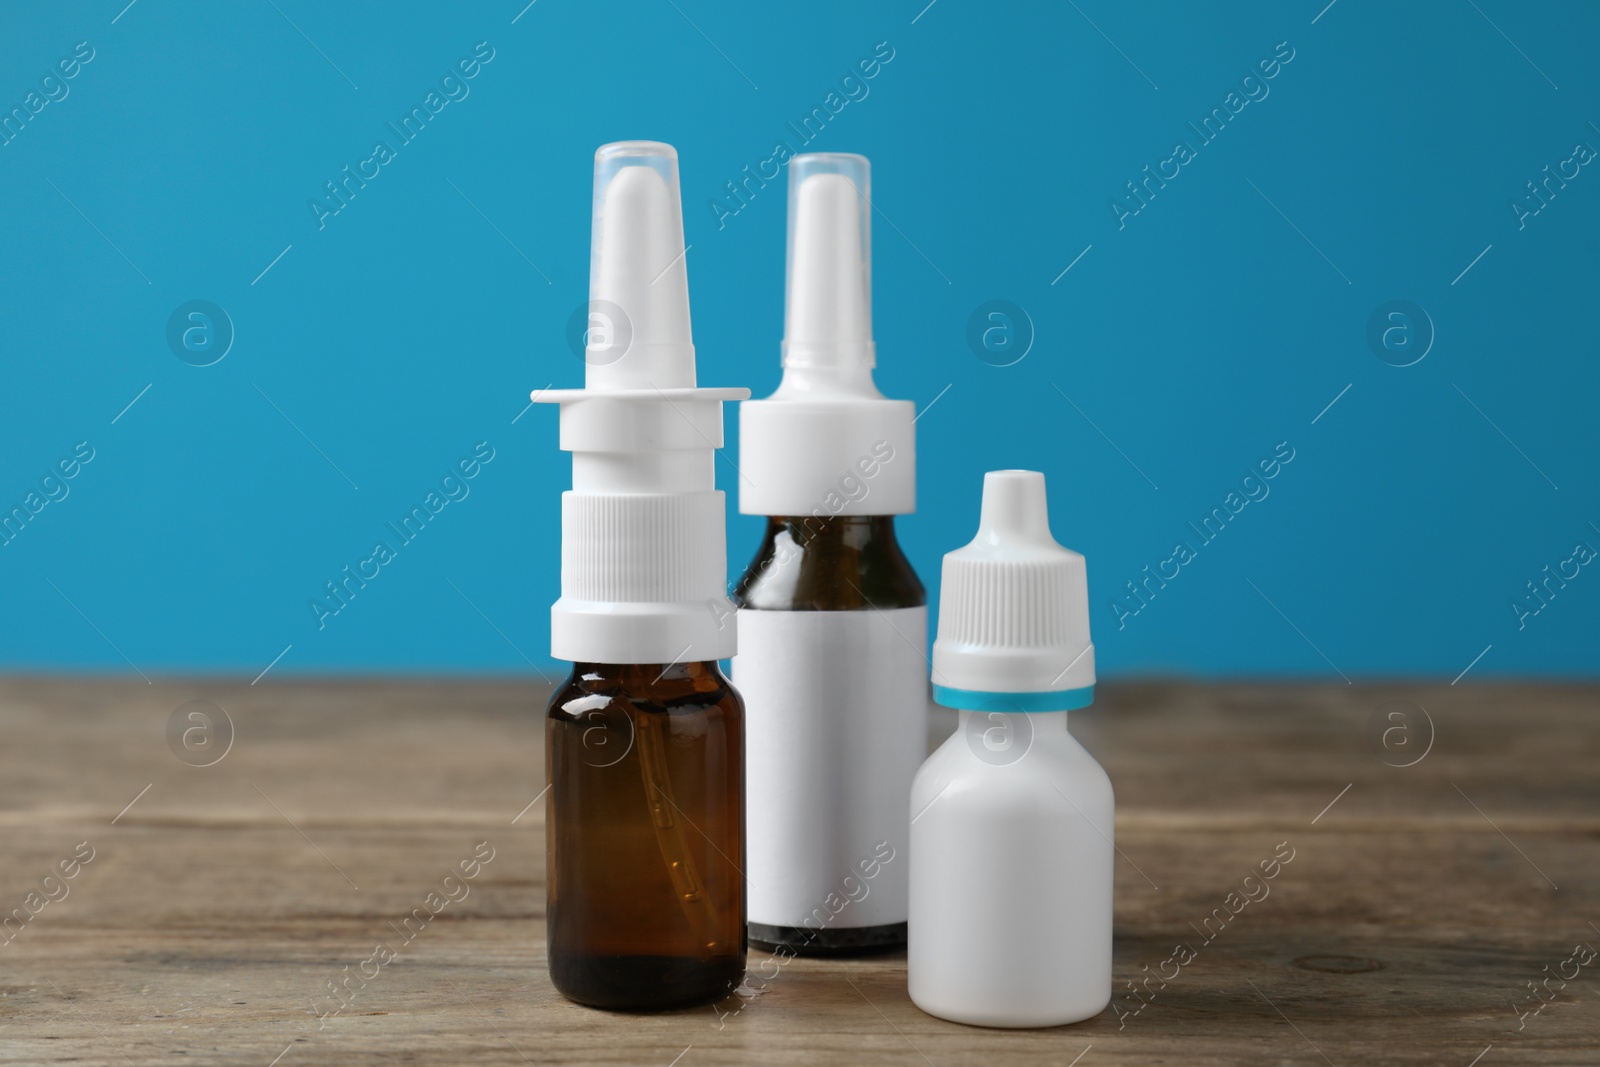 Photo of Nasal sprays in different bottles on wooden table against light blue background